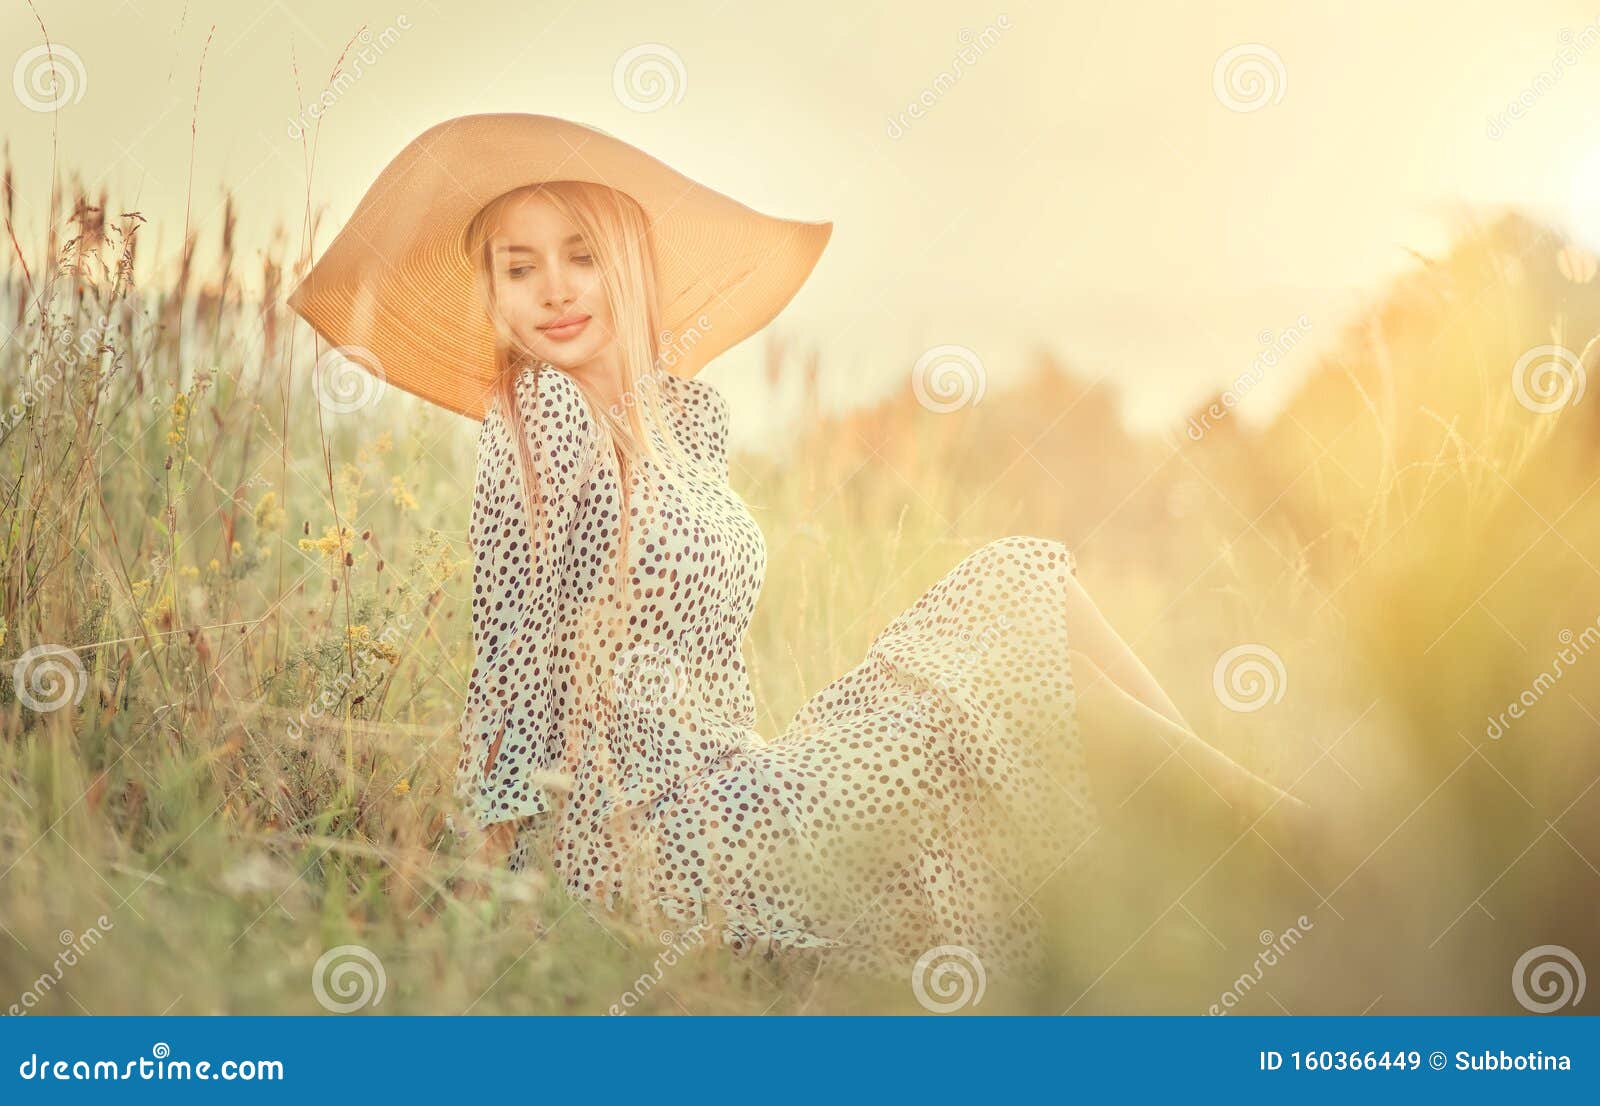 beautiful model girl posing on a field, enjoying nature outdoors in wide brimmed straw hat